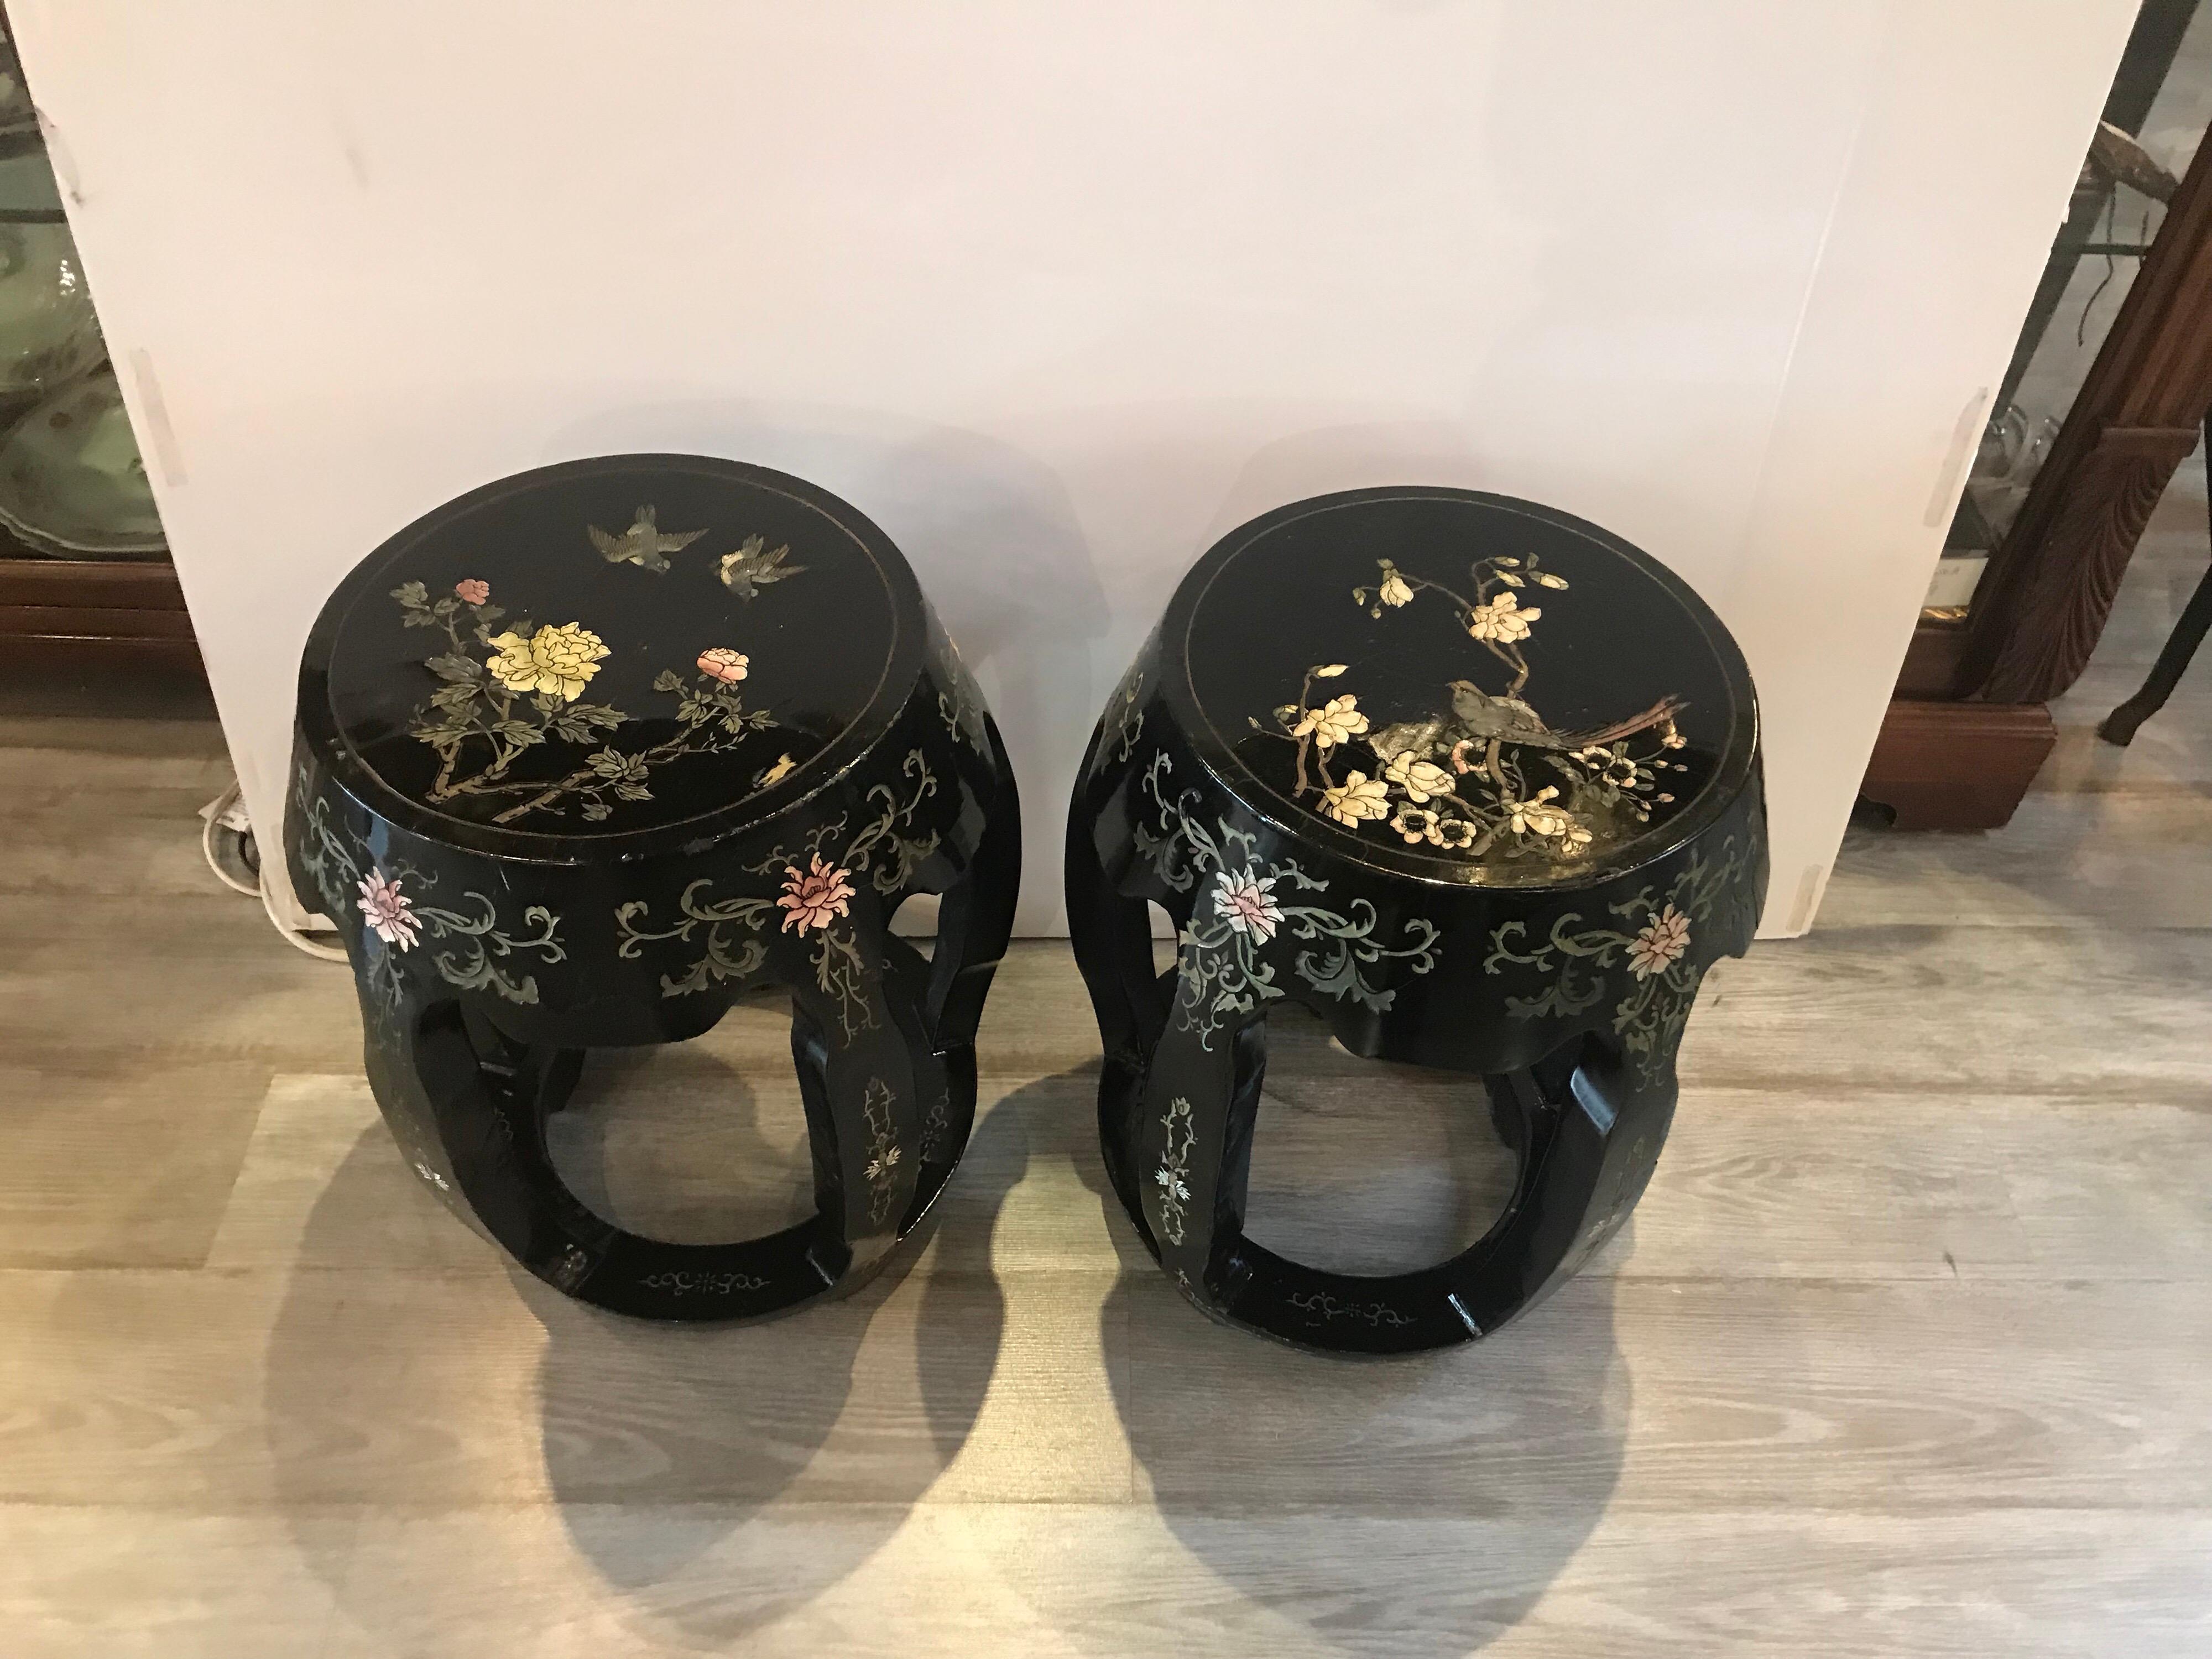 Hollywood Regency Pair of Chinese Black Lacquer Garden Seat Stands